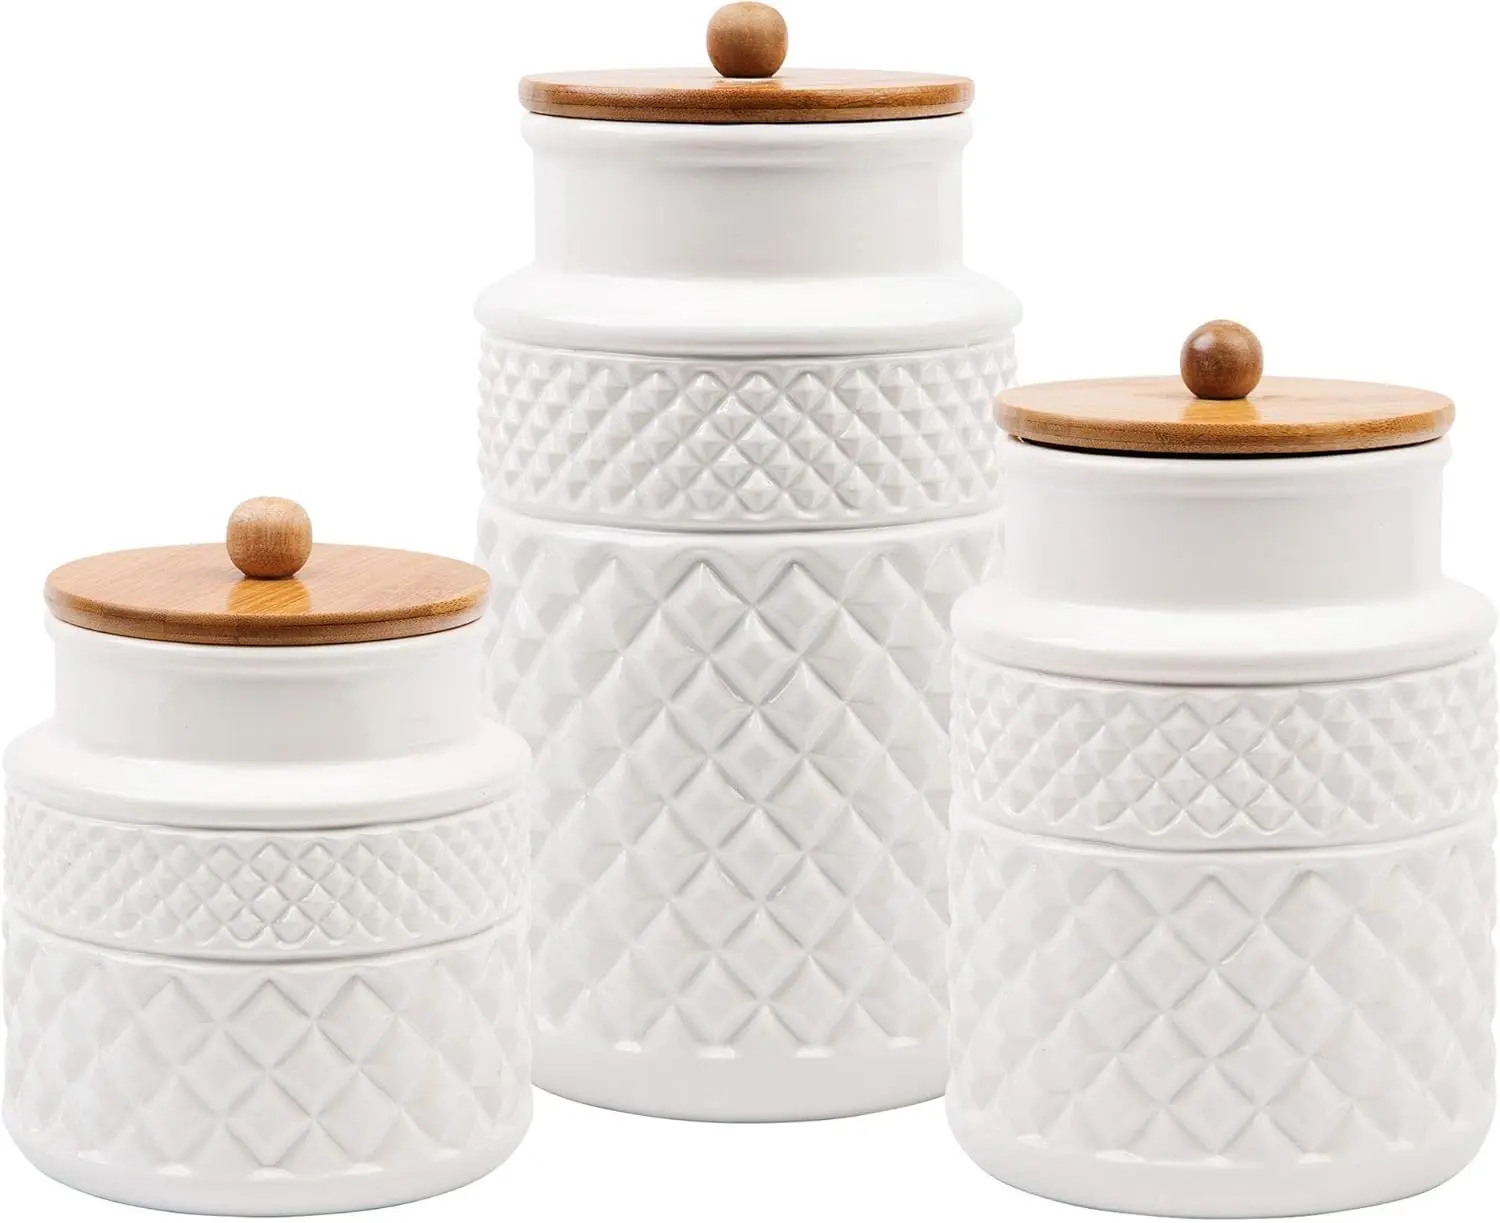 Recreations Embossed Faceted Canister White Ceramic Set of 3 Round Jars with for Kitchen - Food - Bamboo Lid and Rubber Gasket